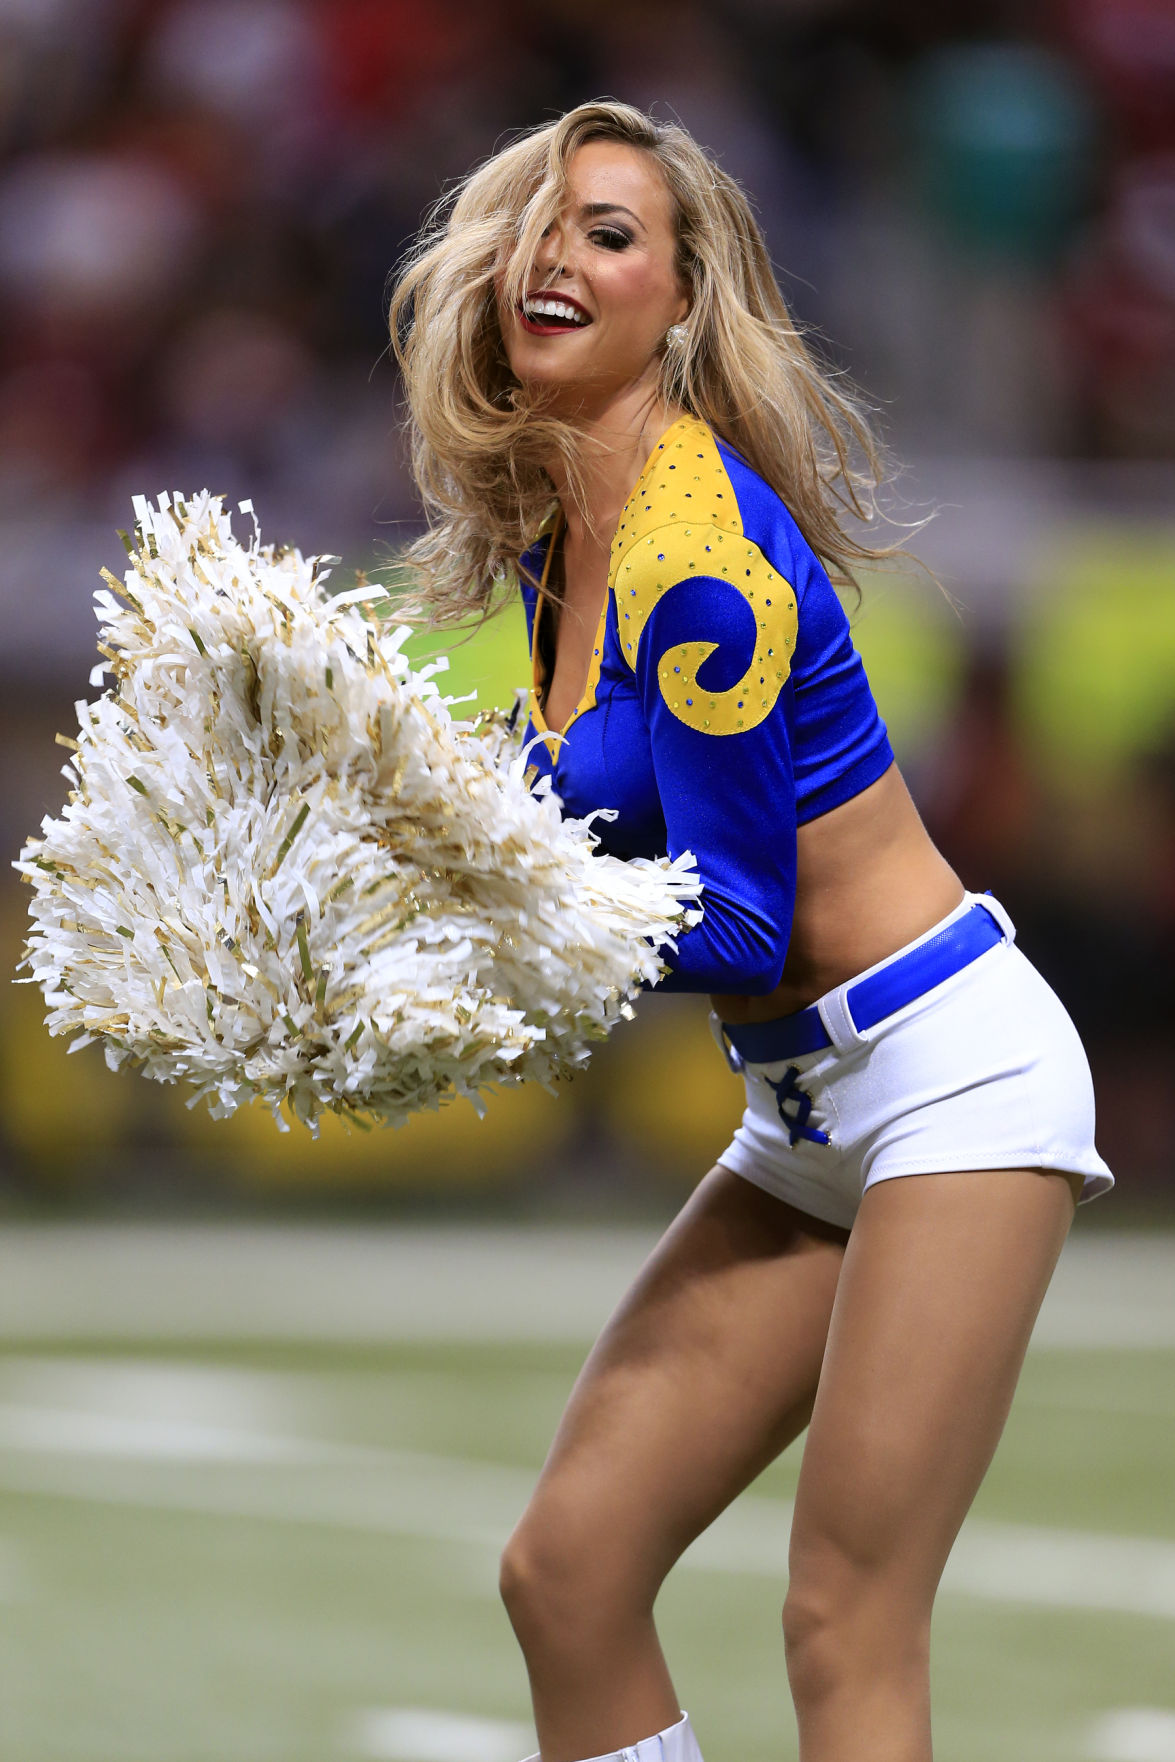 More related nfl cheerleader portraits.